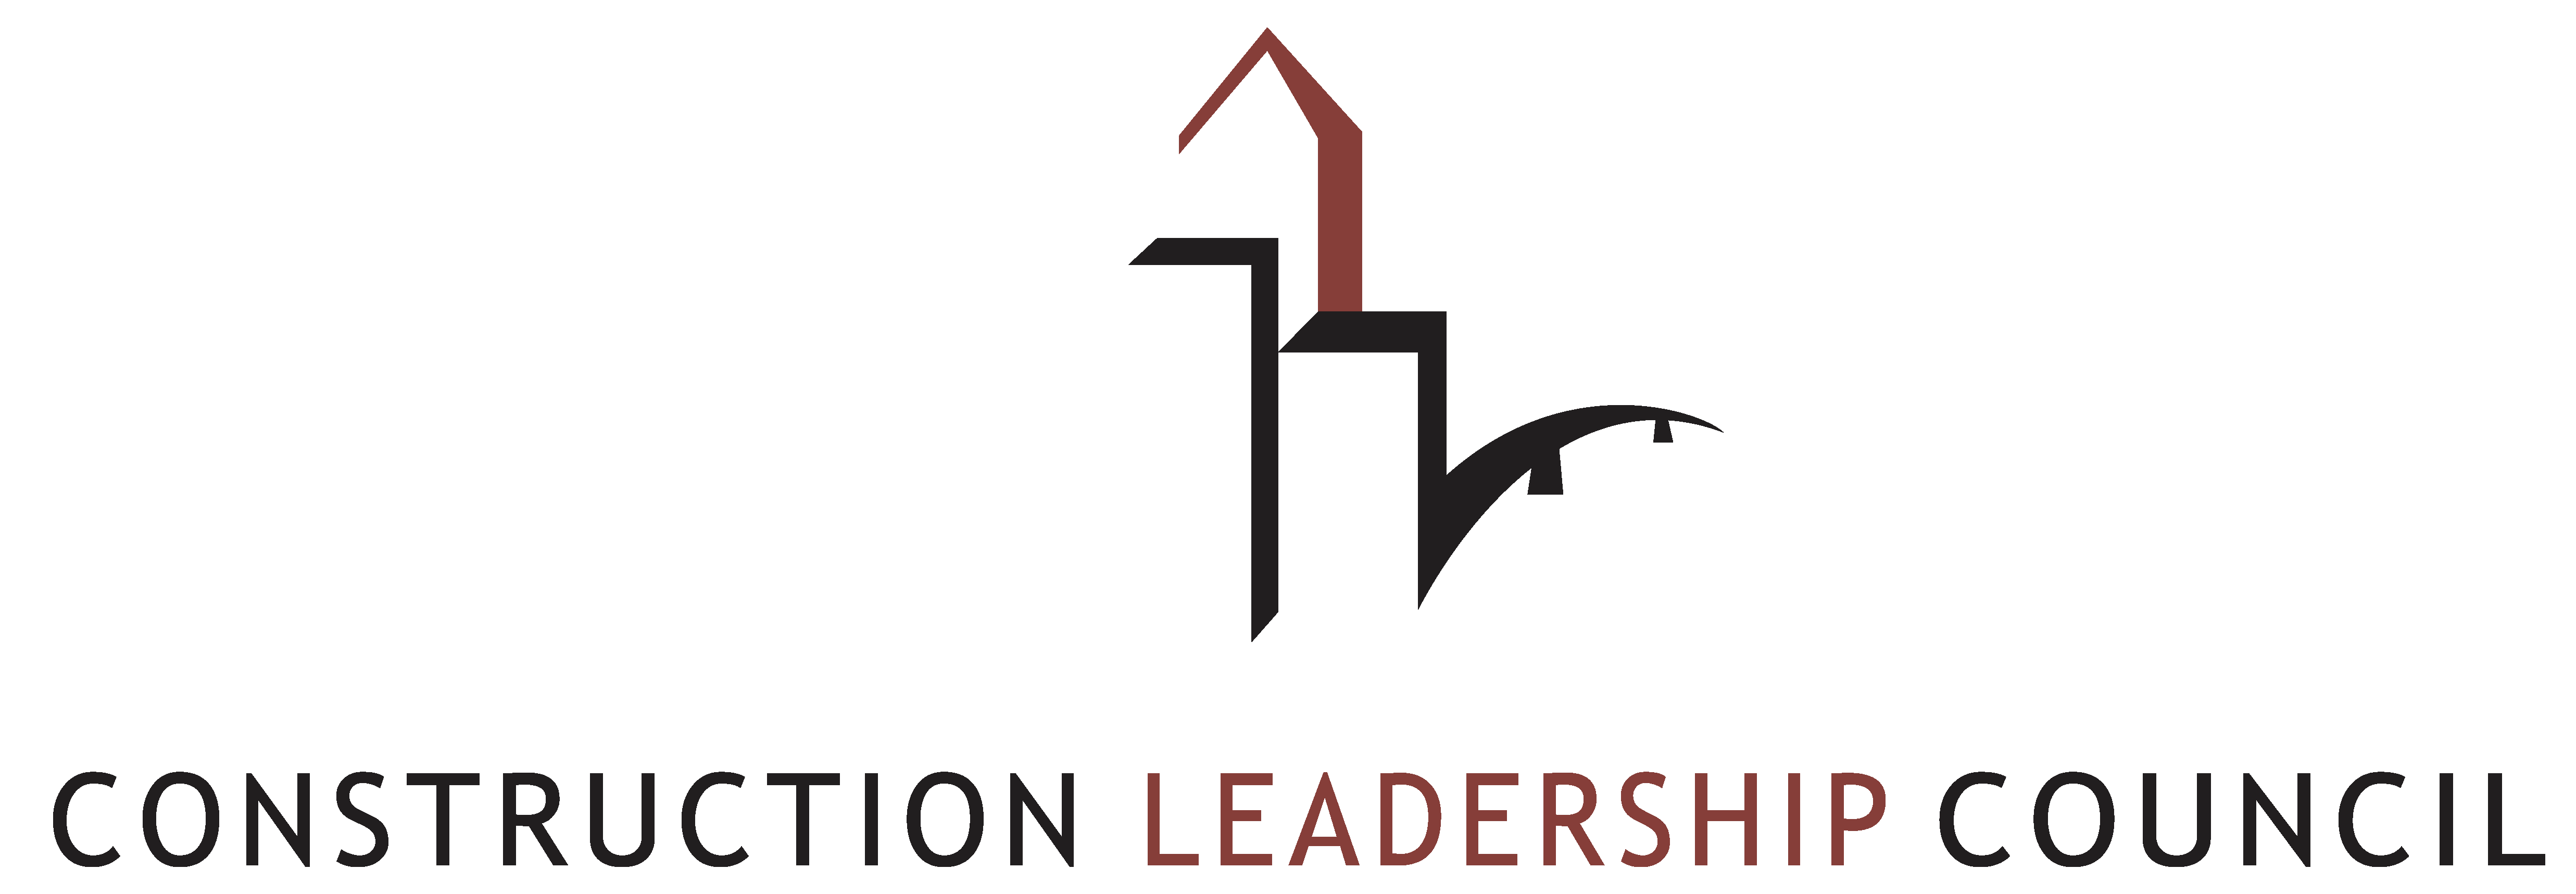 Construction Leadership Council of New Mexico